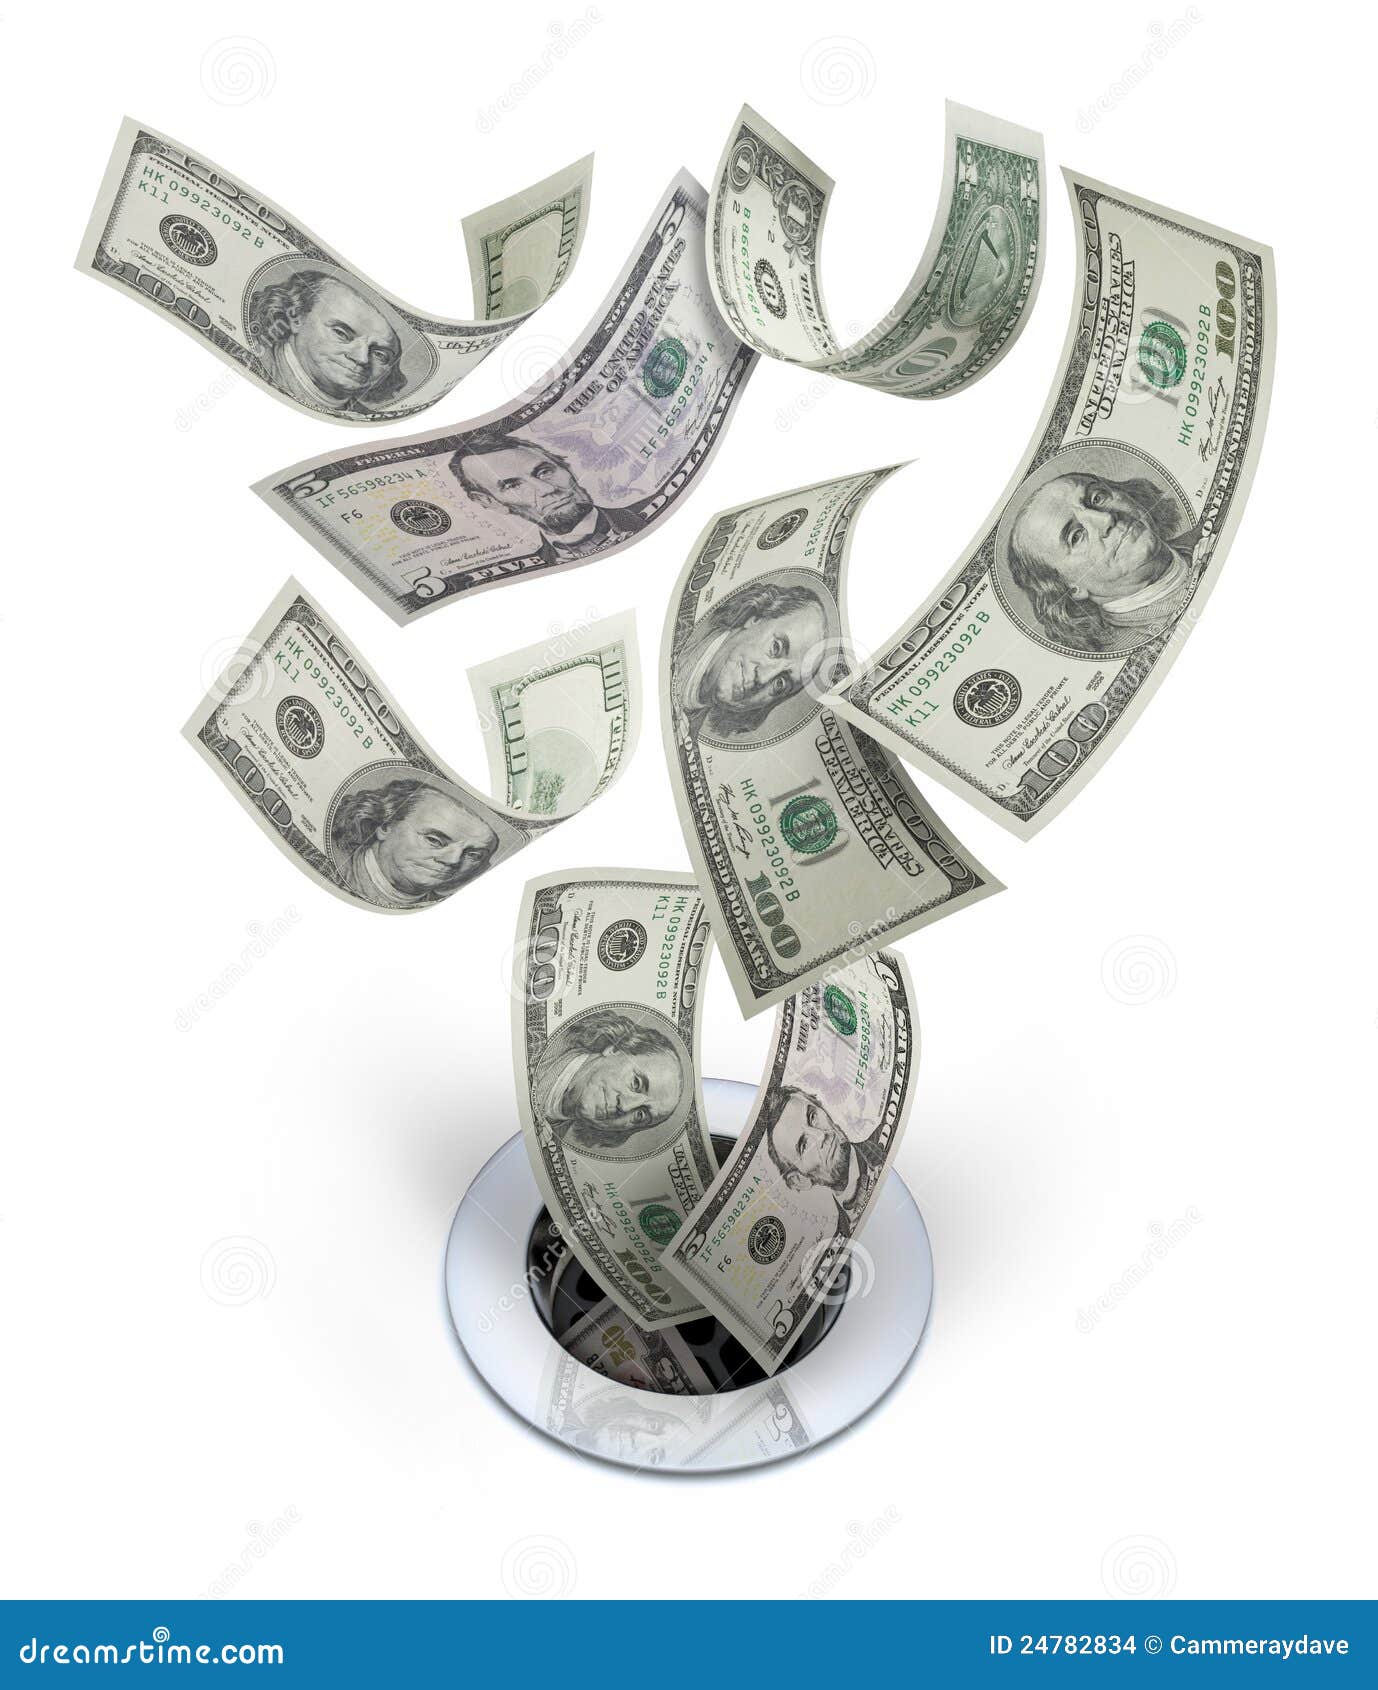 clipart of money going down the drain - photo #16